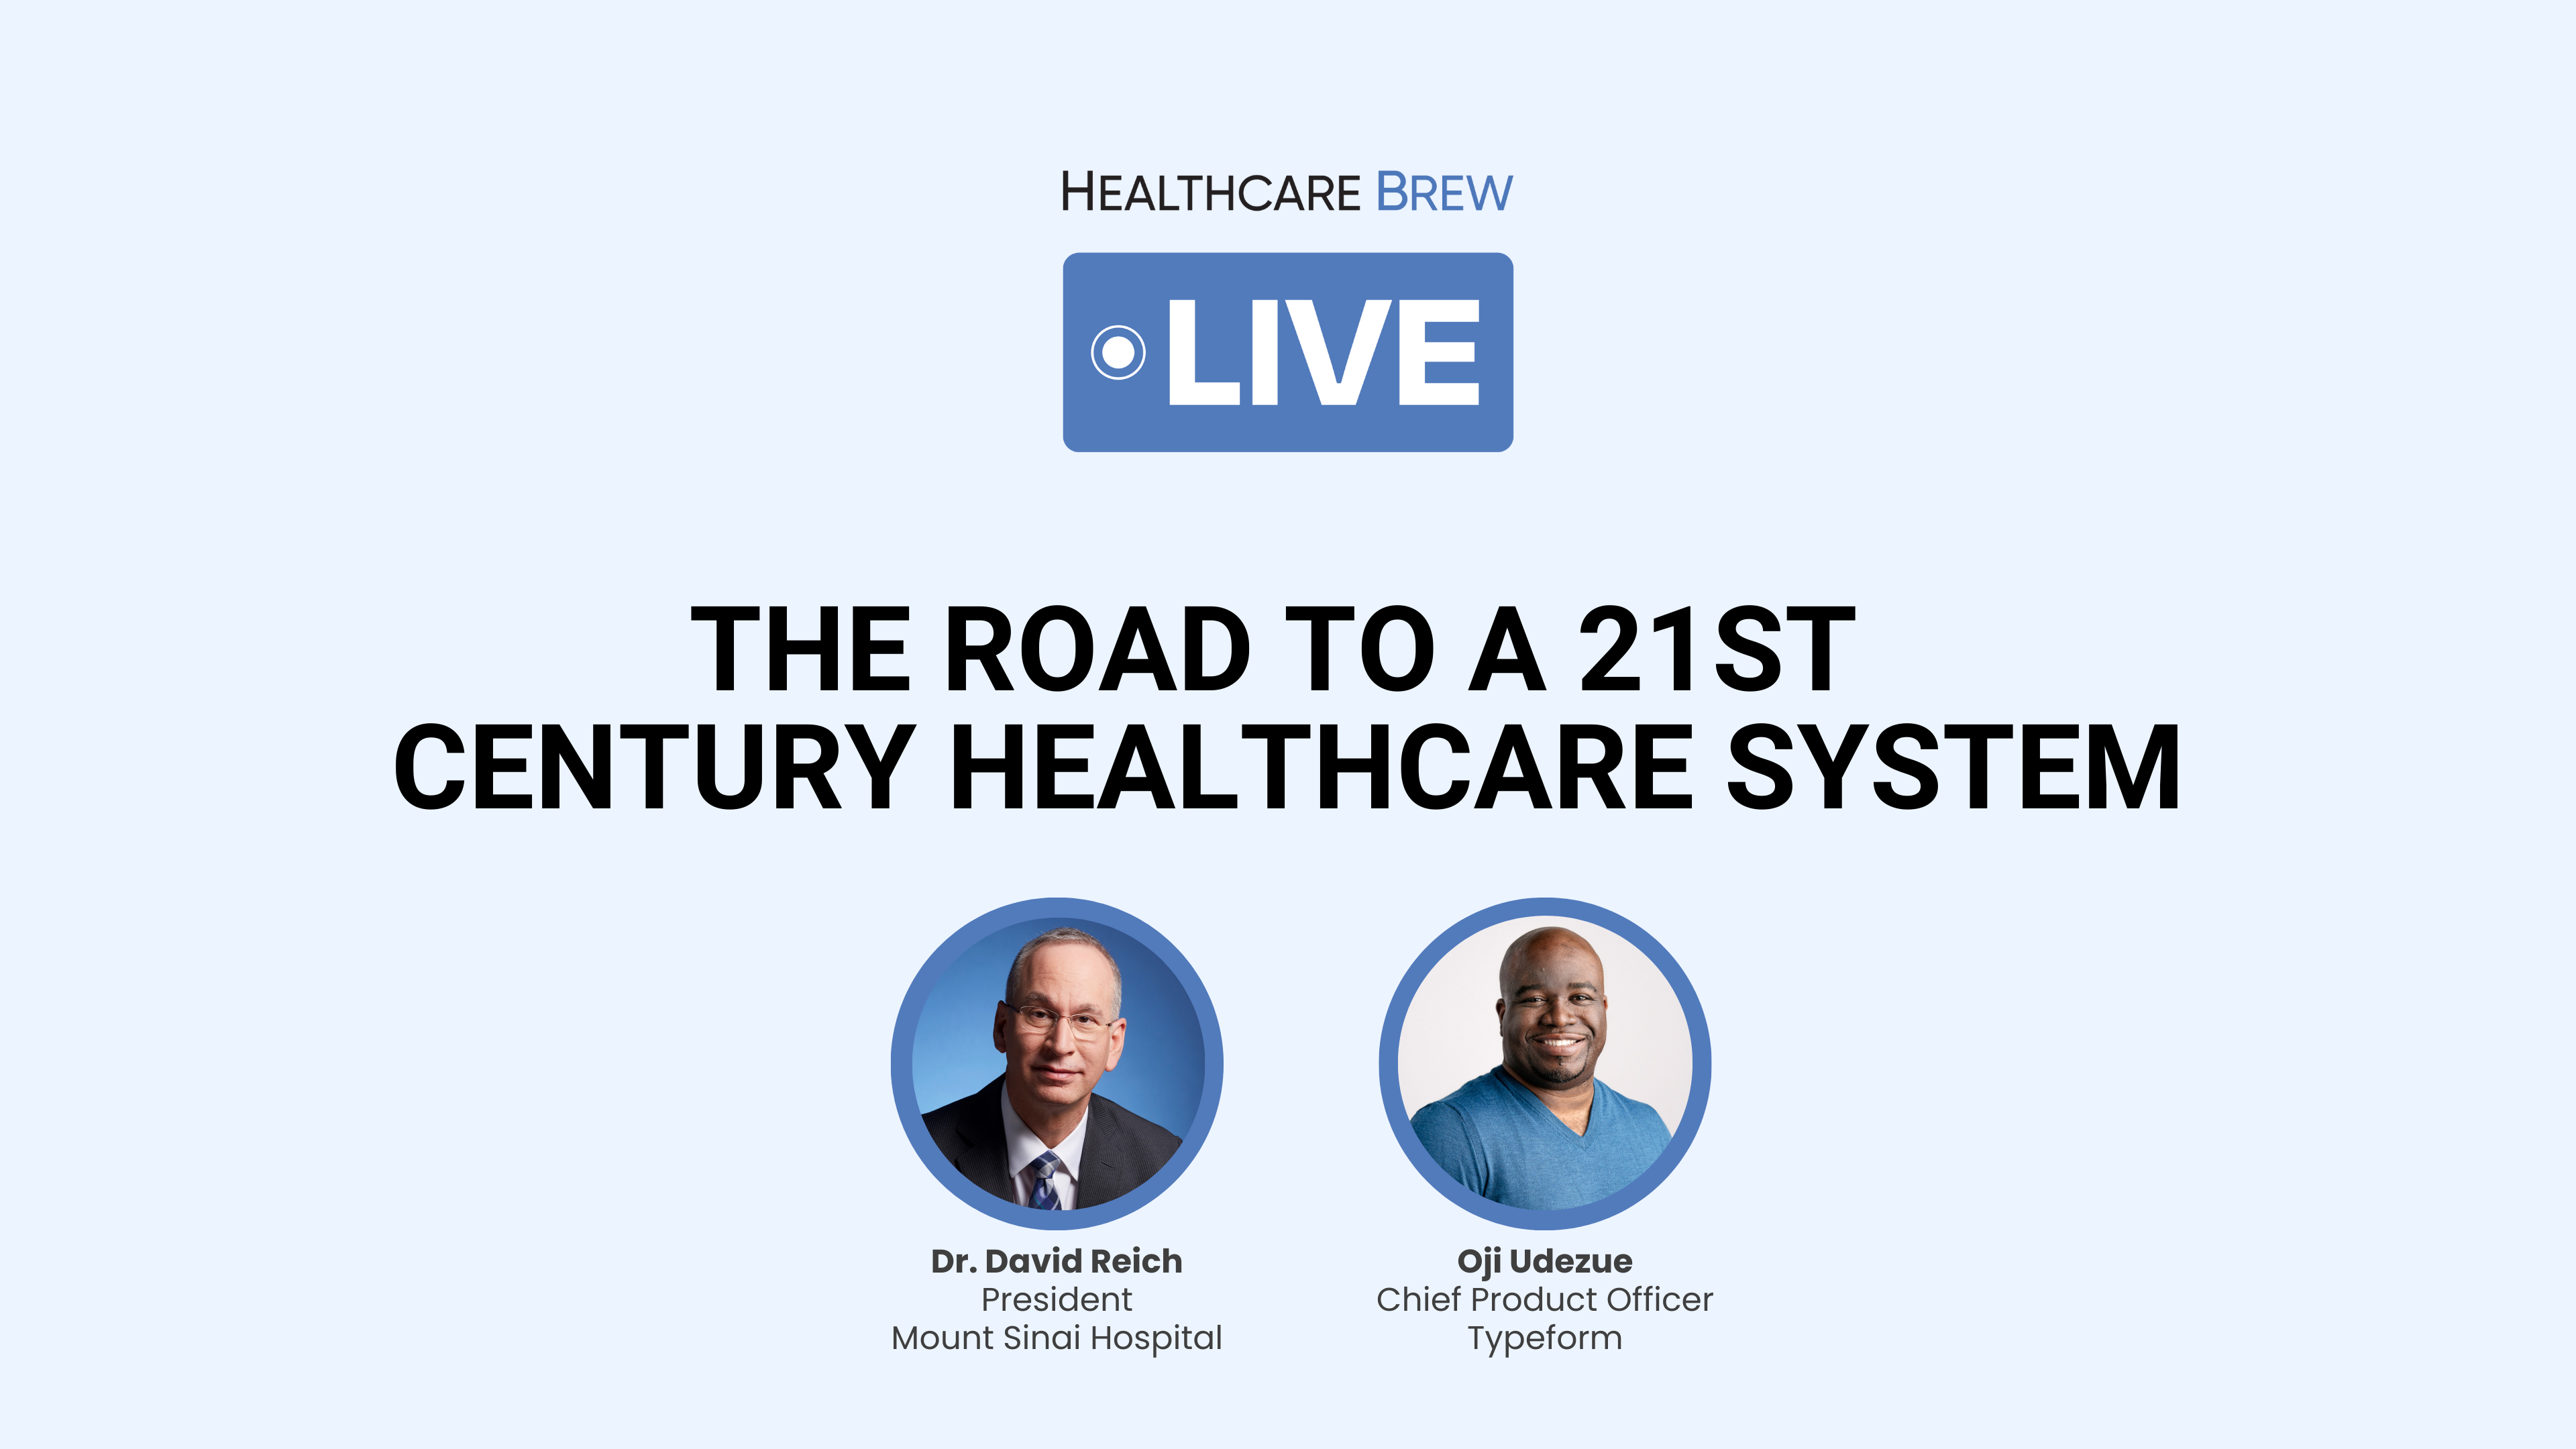 Healthcare Brew Live virtual event "The Road to a 21st Century Healthcare System"